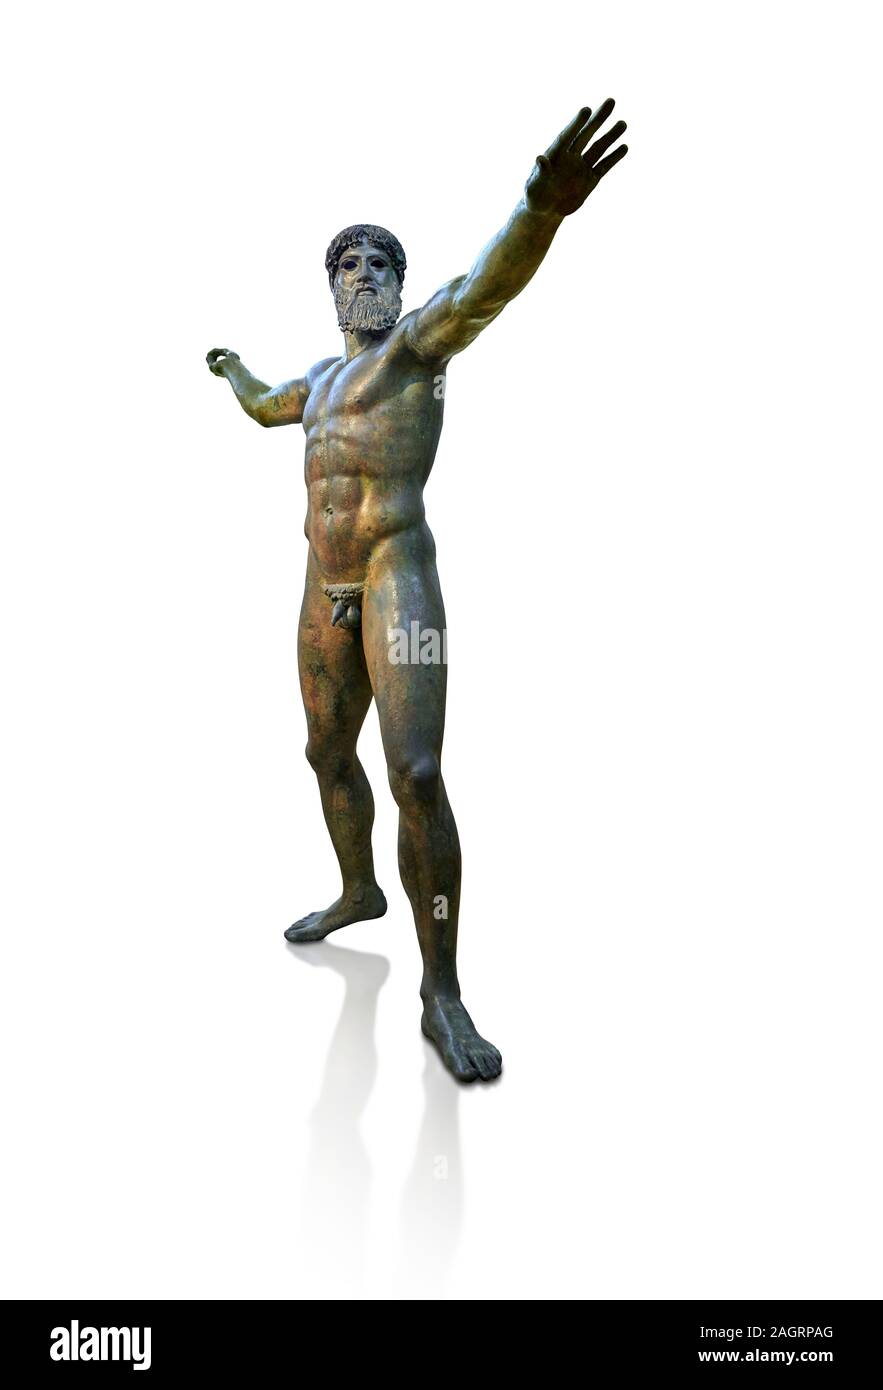 Early classical ancient Greek bronze statue of Zeus or Poseidon, circa 450 BC. Athens National Arcjaeological Museum, cat no X15161. White background Stock Photo